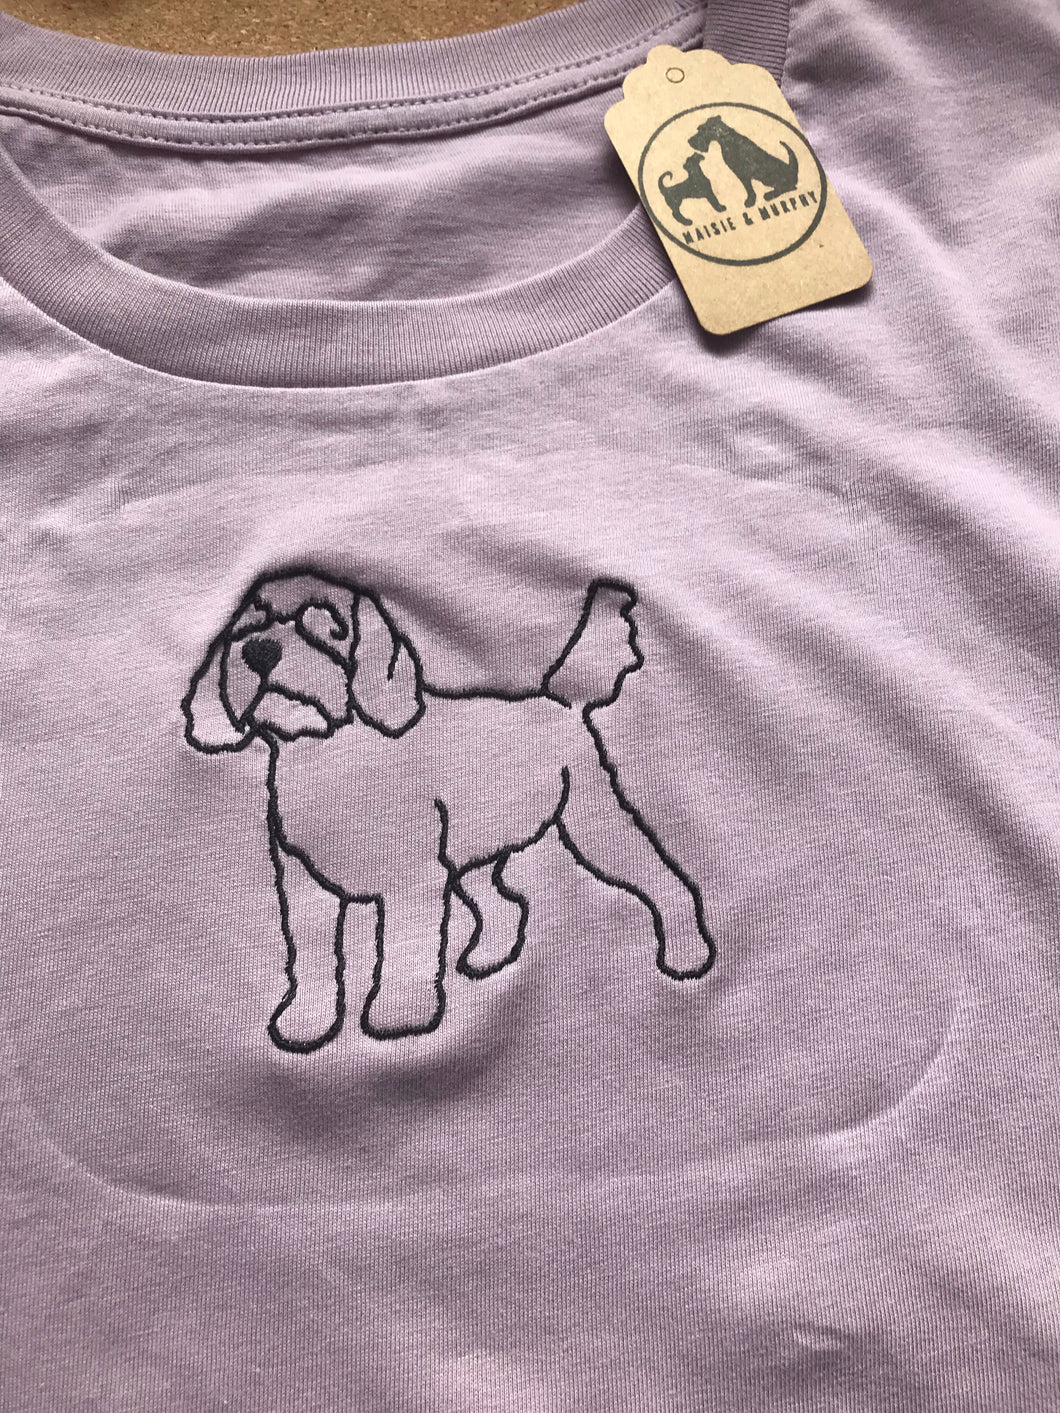 Embroidered Cockapoo T-shirt - Gifts for cockapoo/ cavapoo lovers and owners